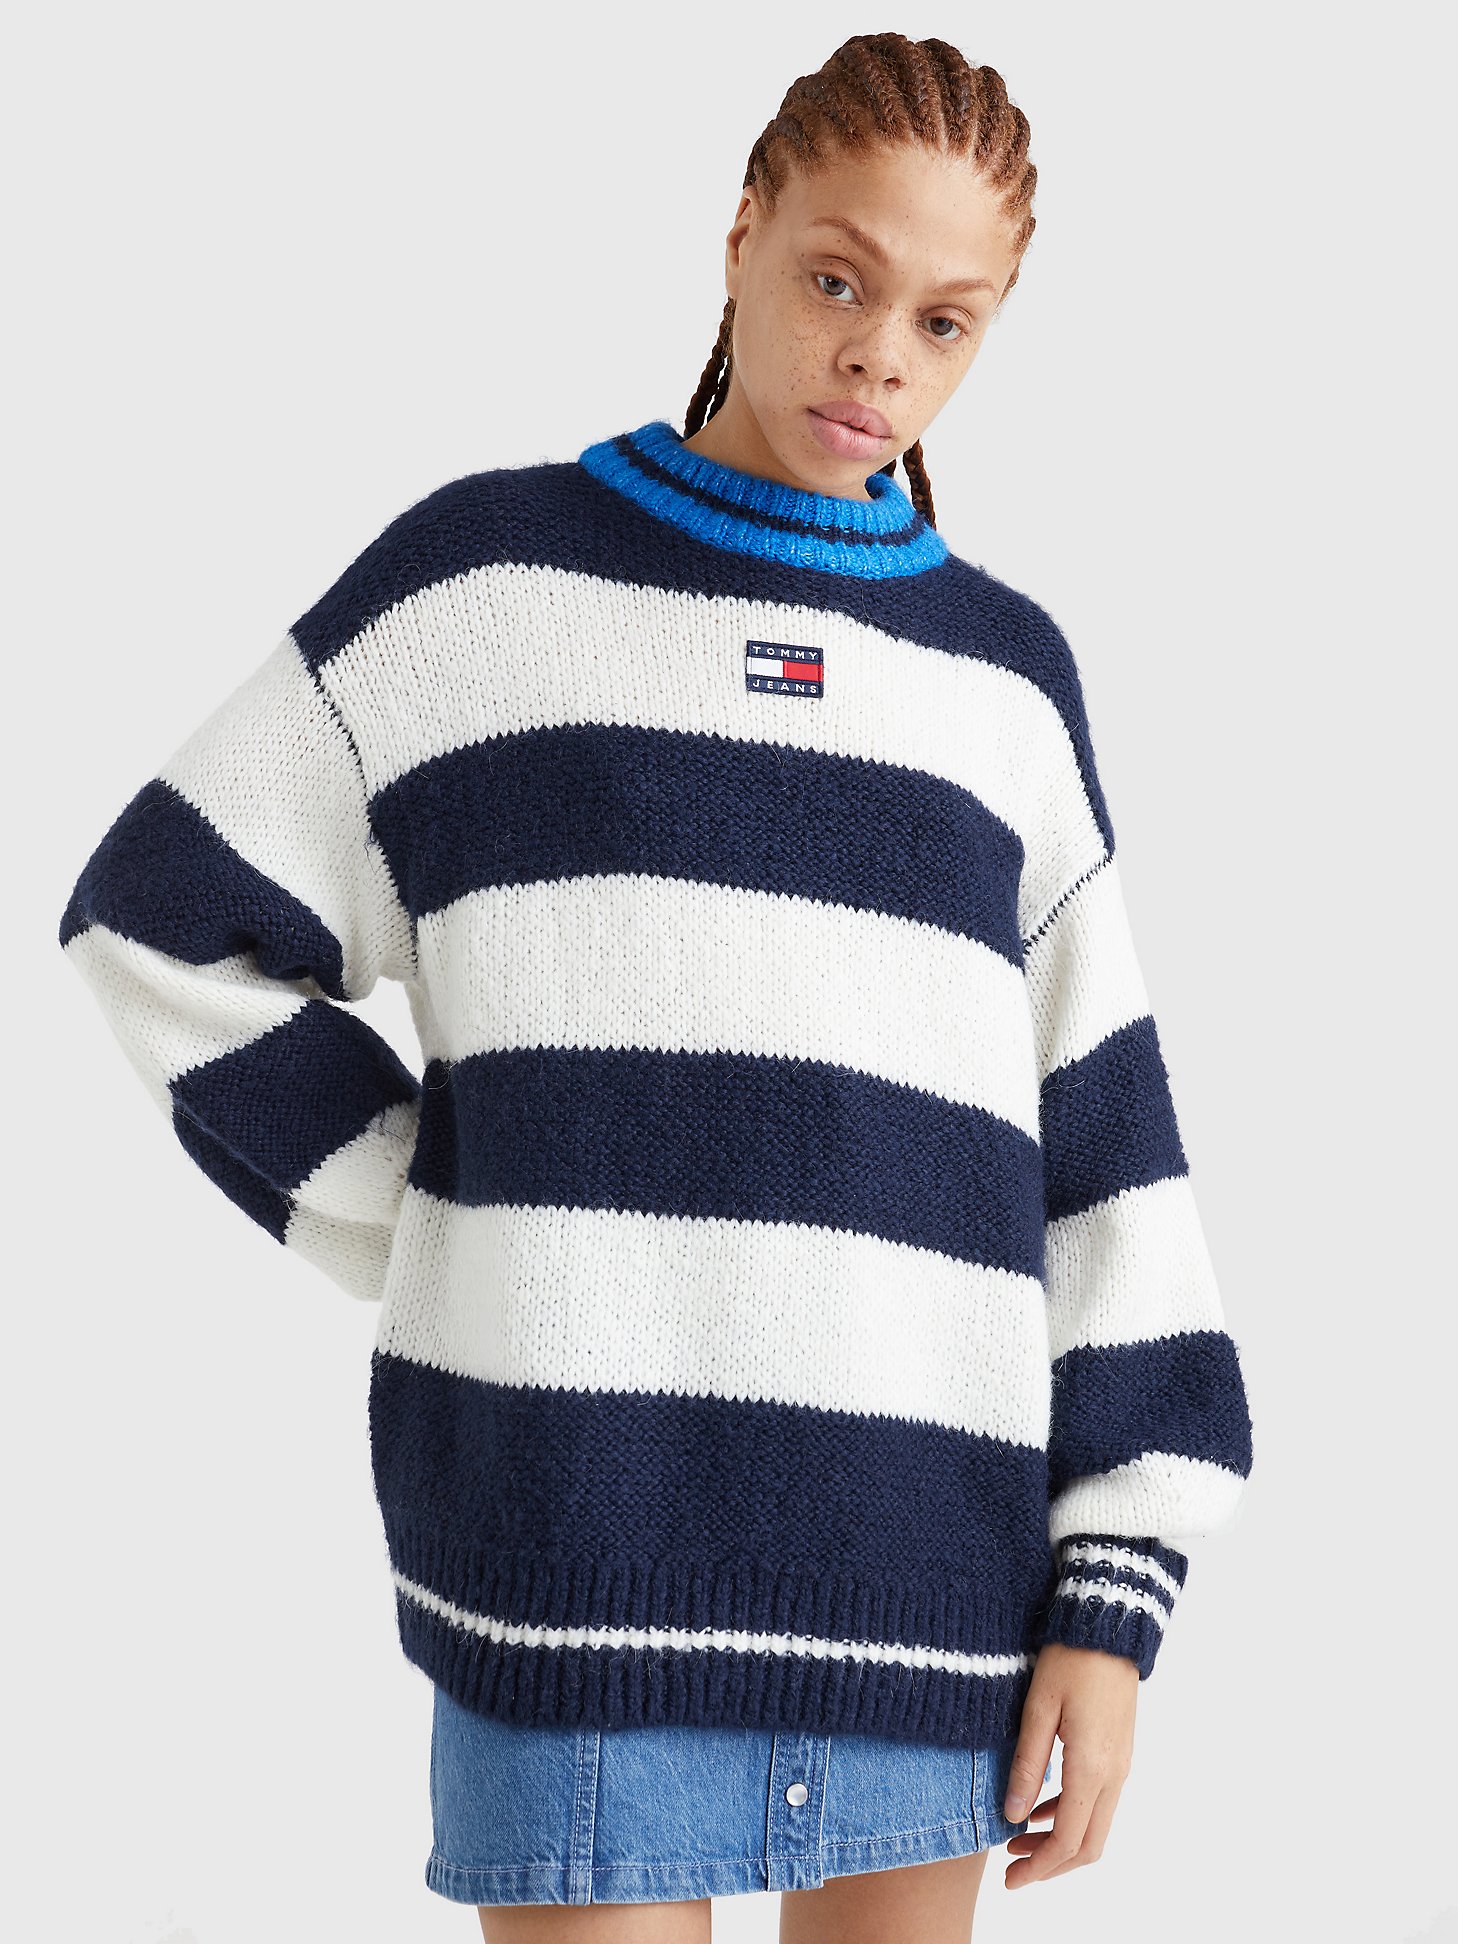 Oversize Rugby Stripe Sweater |